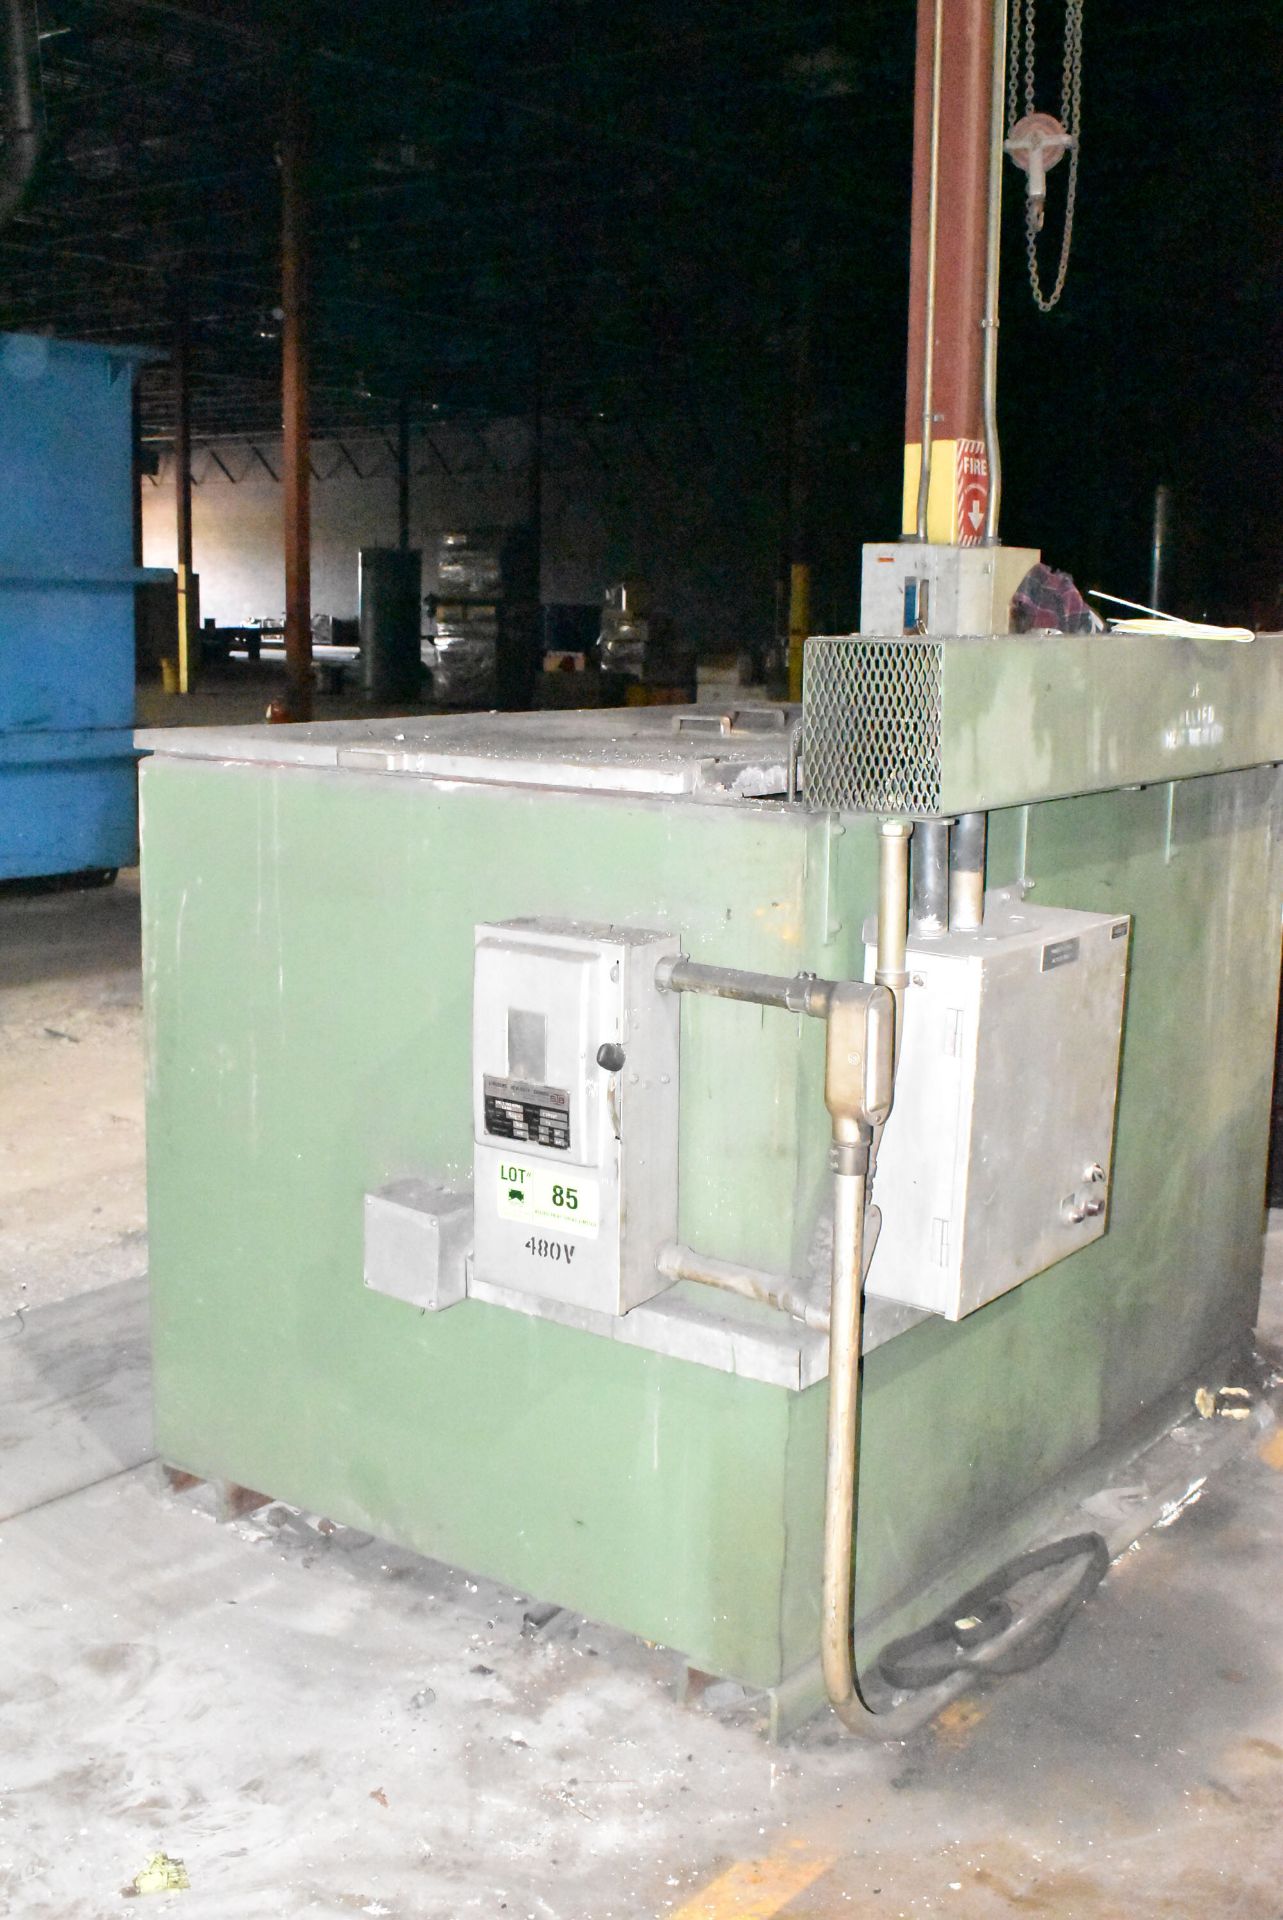 LINDBERG MODEL 484872 ELECTRIC SALT FURNACE WITH 500 DEGREES F MAX TEMP, 48"Wx72"Lx48"D APPROX SIZE, - Image 4 of 6